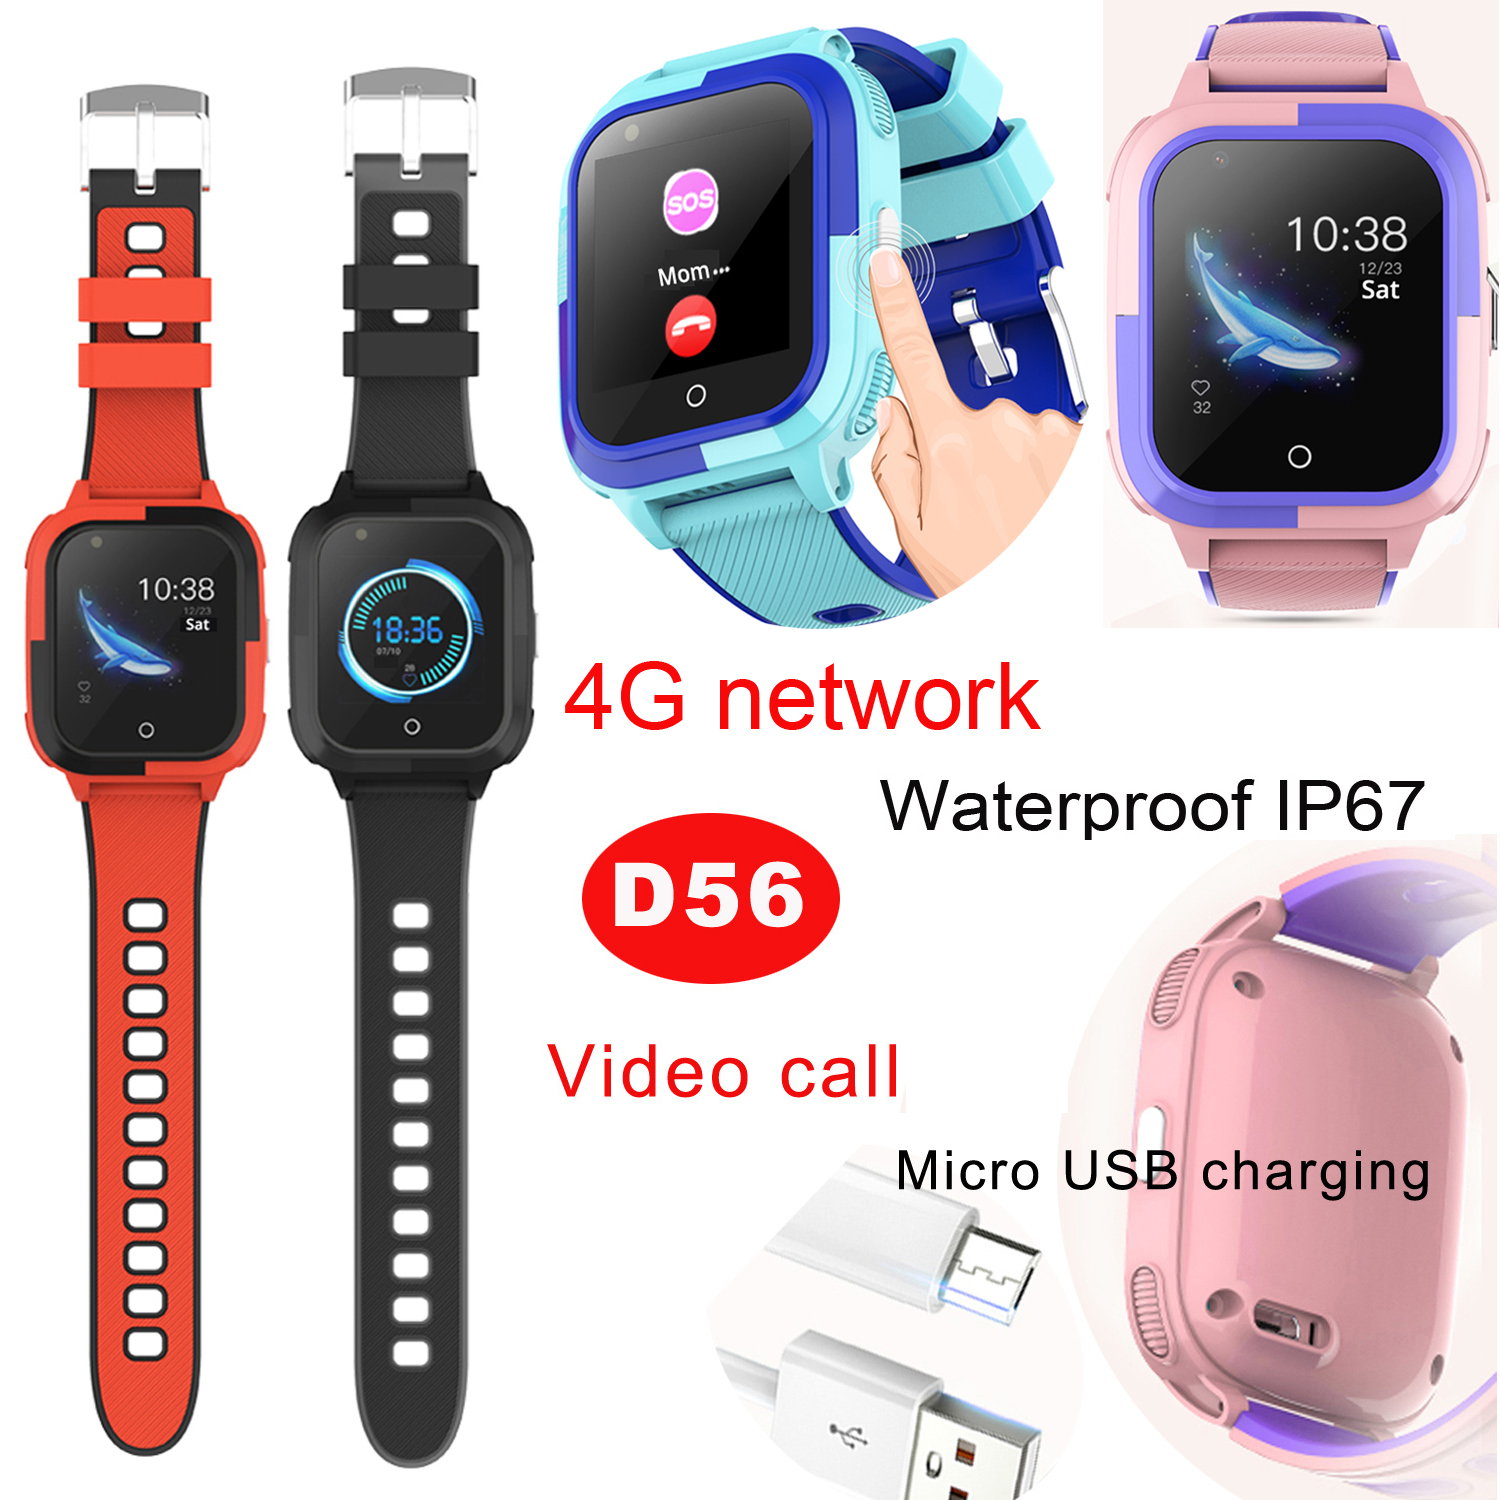 China manufacturer 4G Kids security IP67 Waterproof New arrival Children GPS Tracker watch with Video call D56